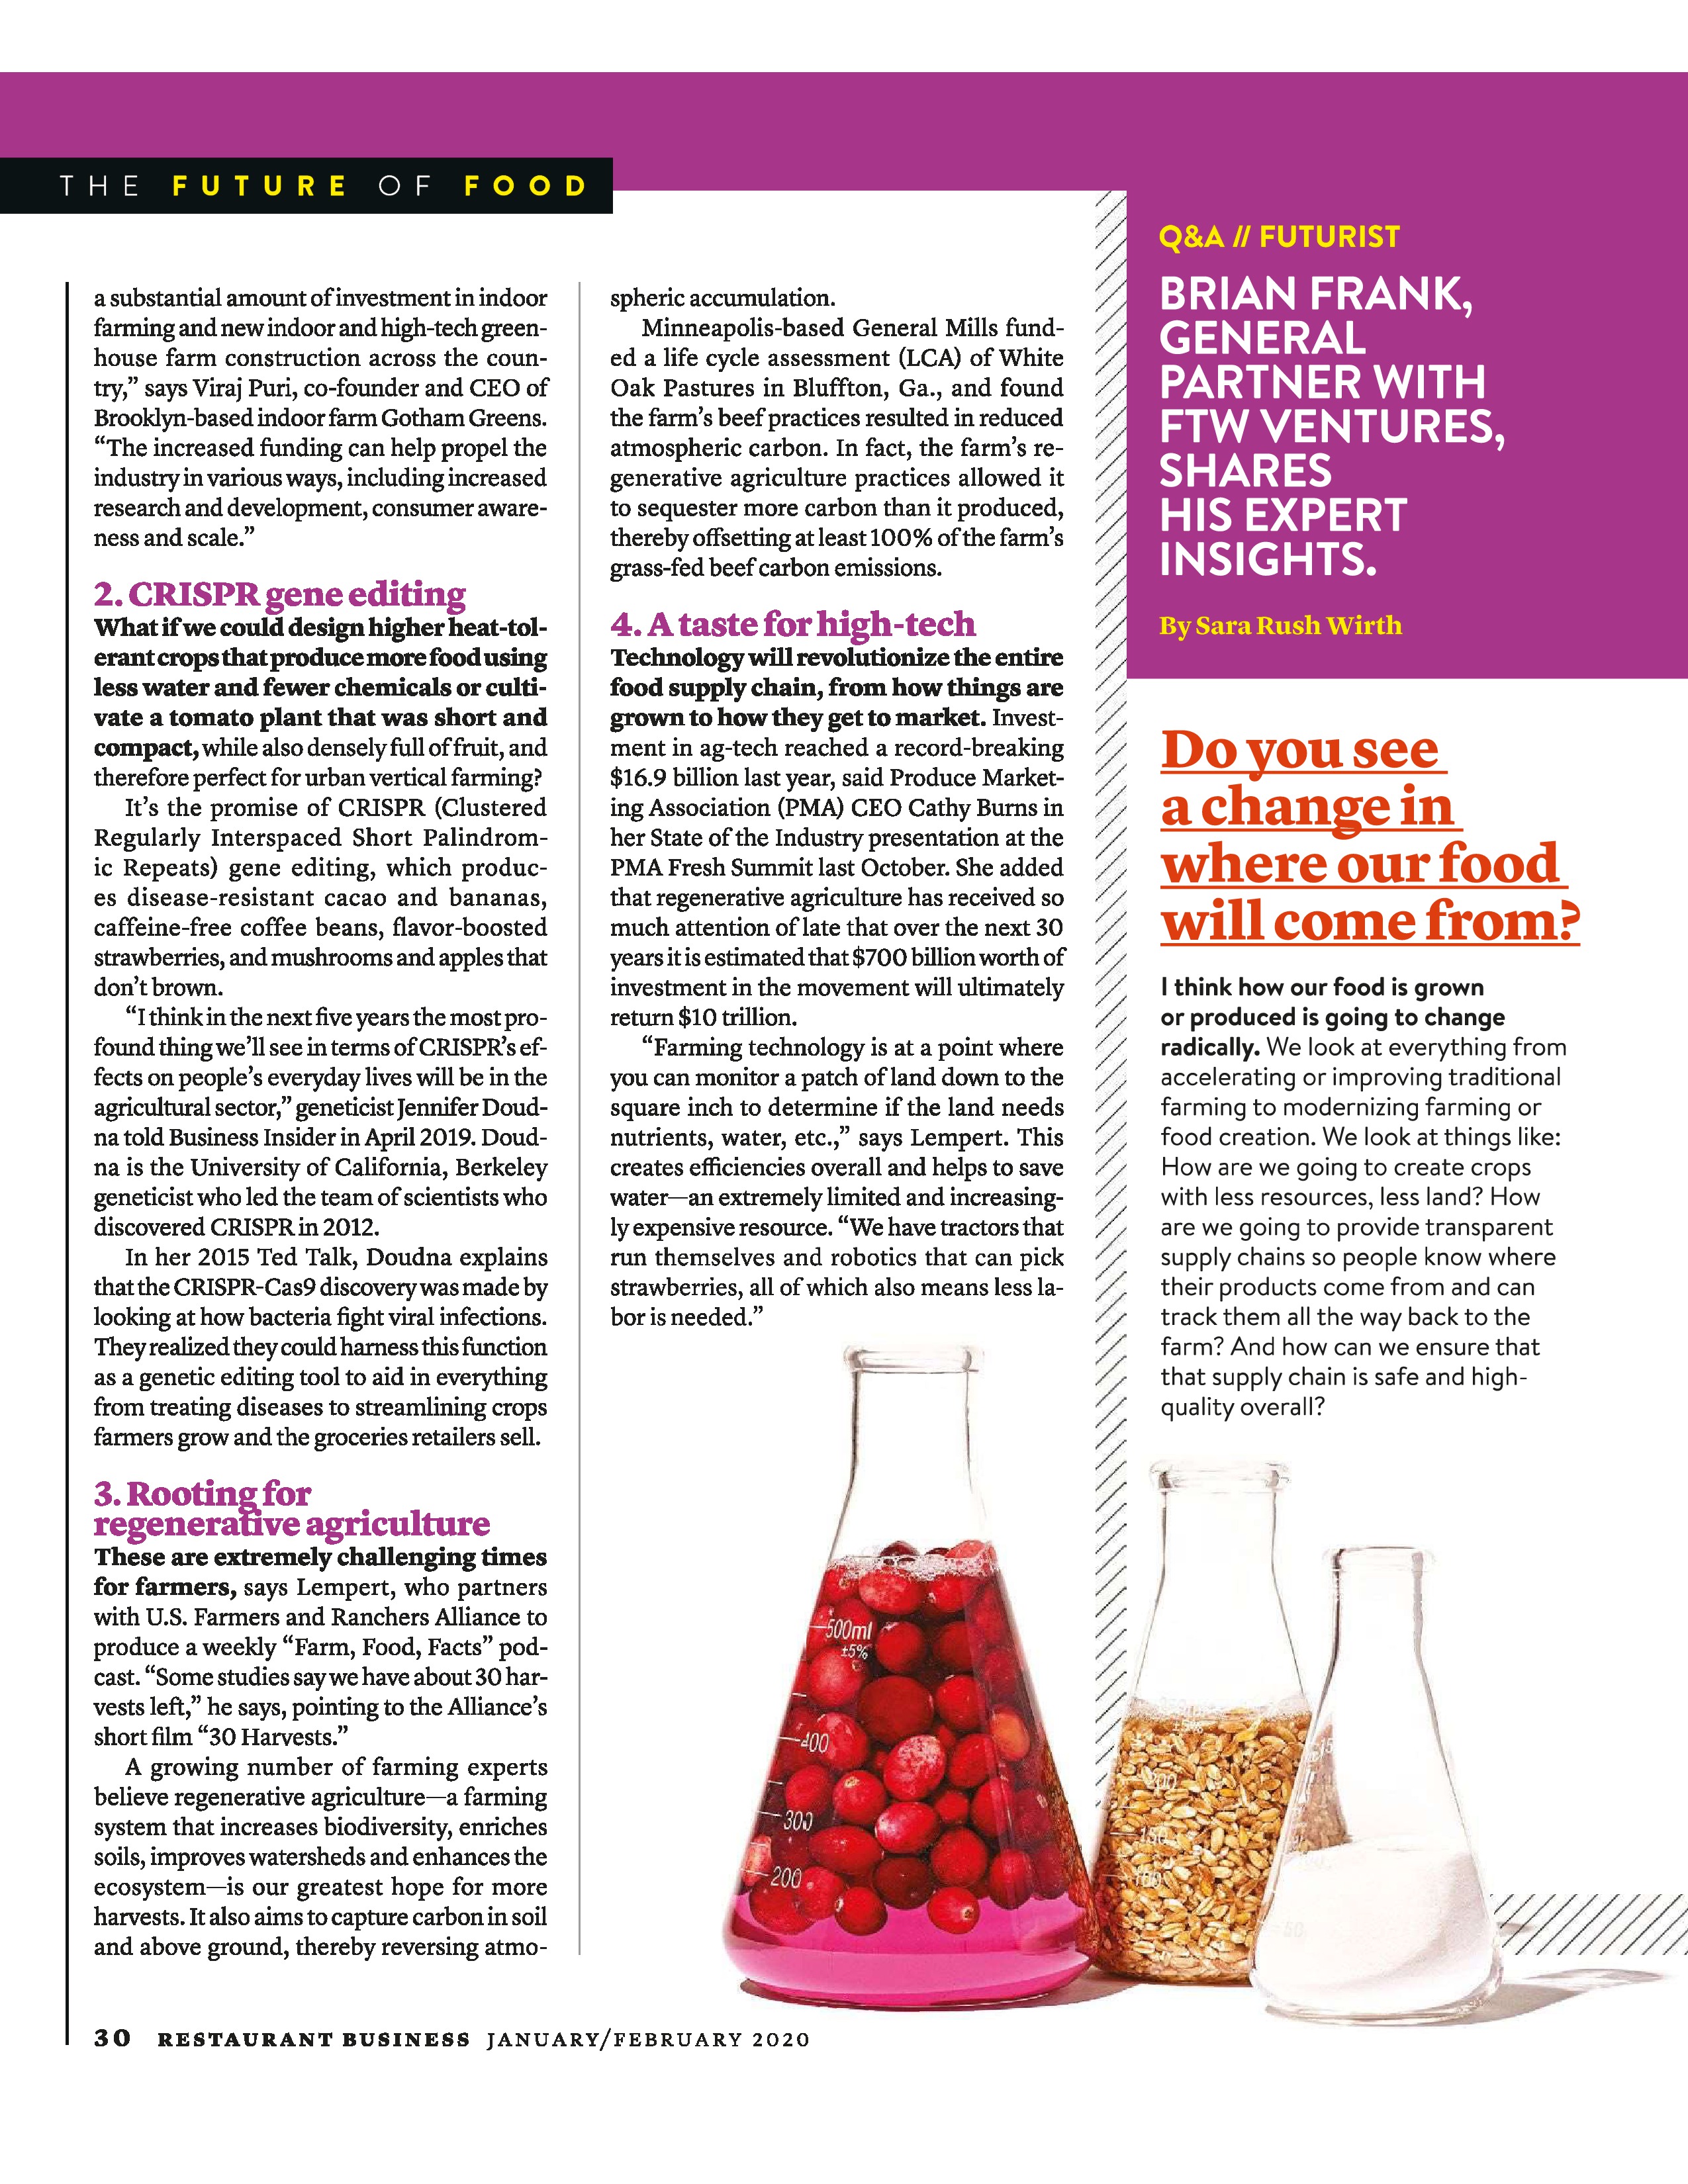 The Future Of Food Restaurant Business February 2020-page-3